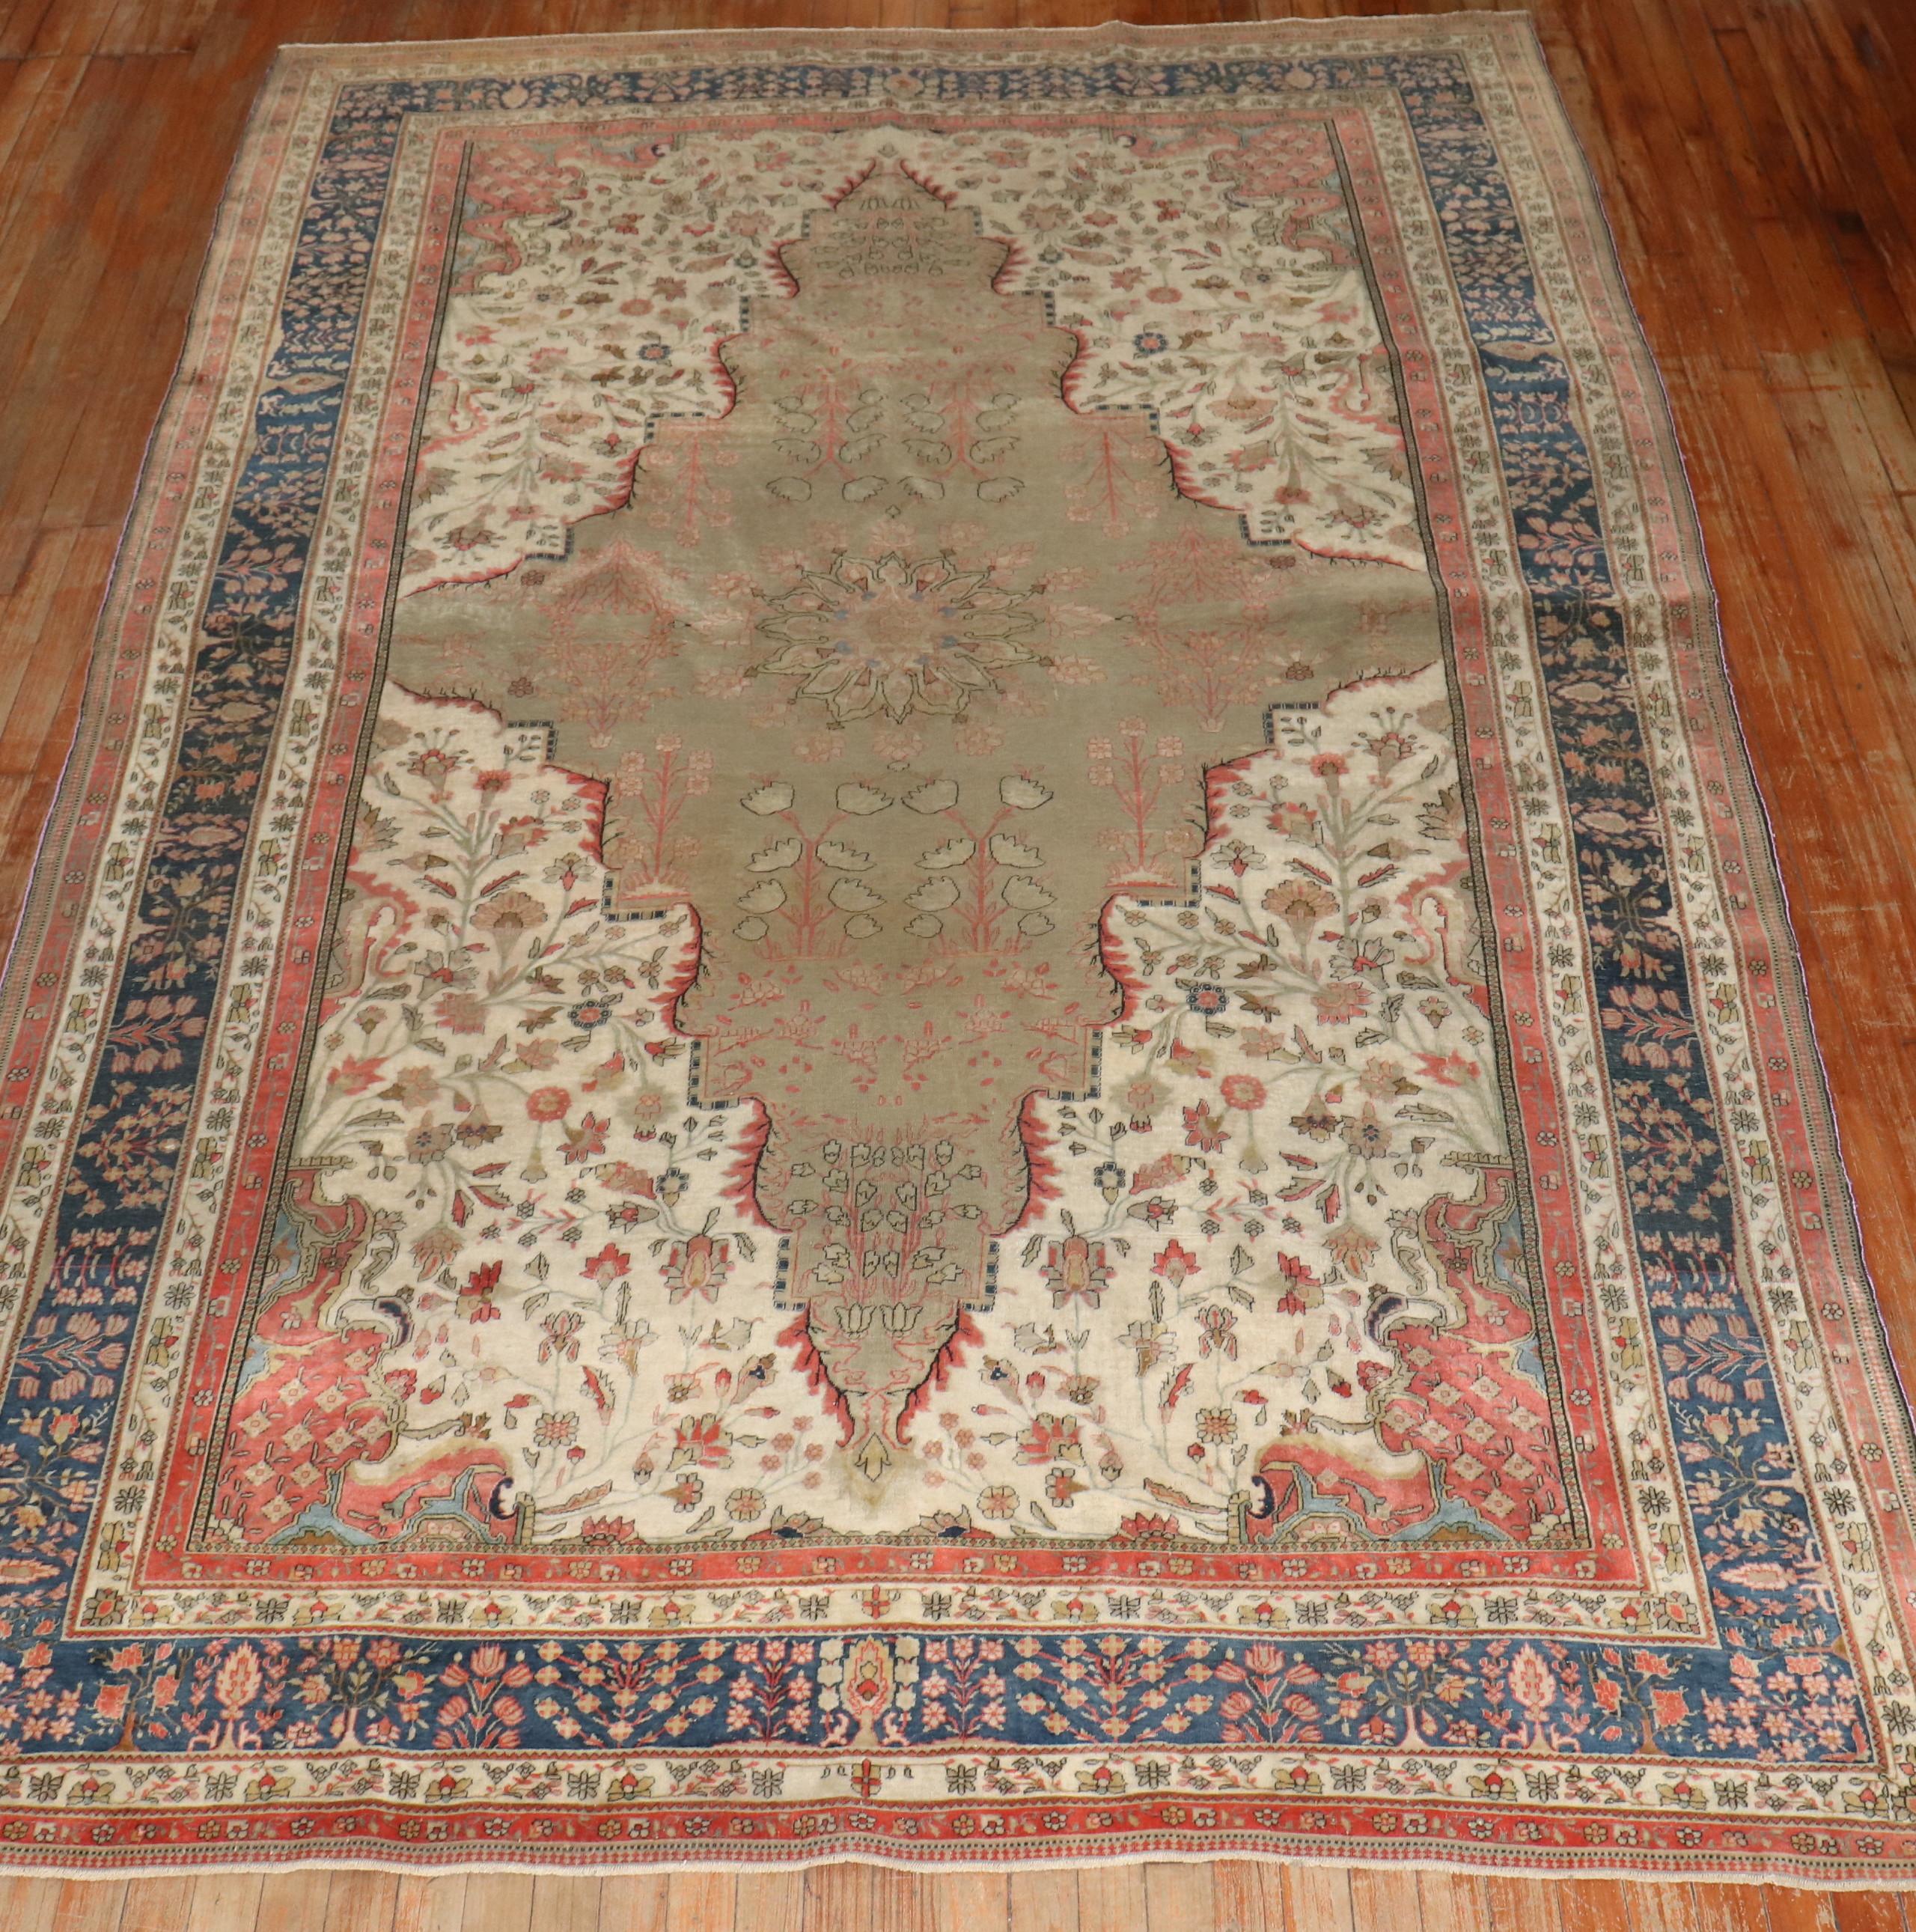 Late 19th Century small room size Mohtasham Kashan Rug

6'8'' x 10'10''

The most rare group of Kashan carpets that utilizes non-traditional designs and color palettes is the “Motashem Kashan,” which were woven up to the end of the 19th century.